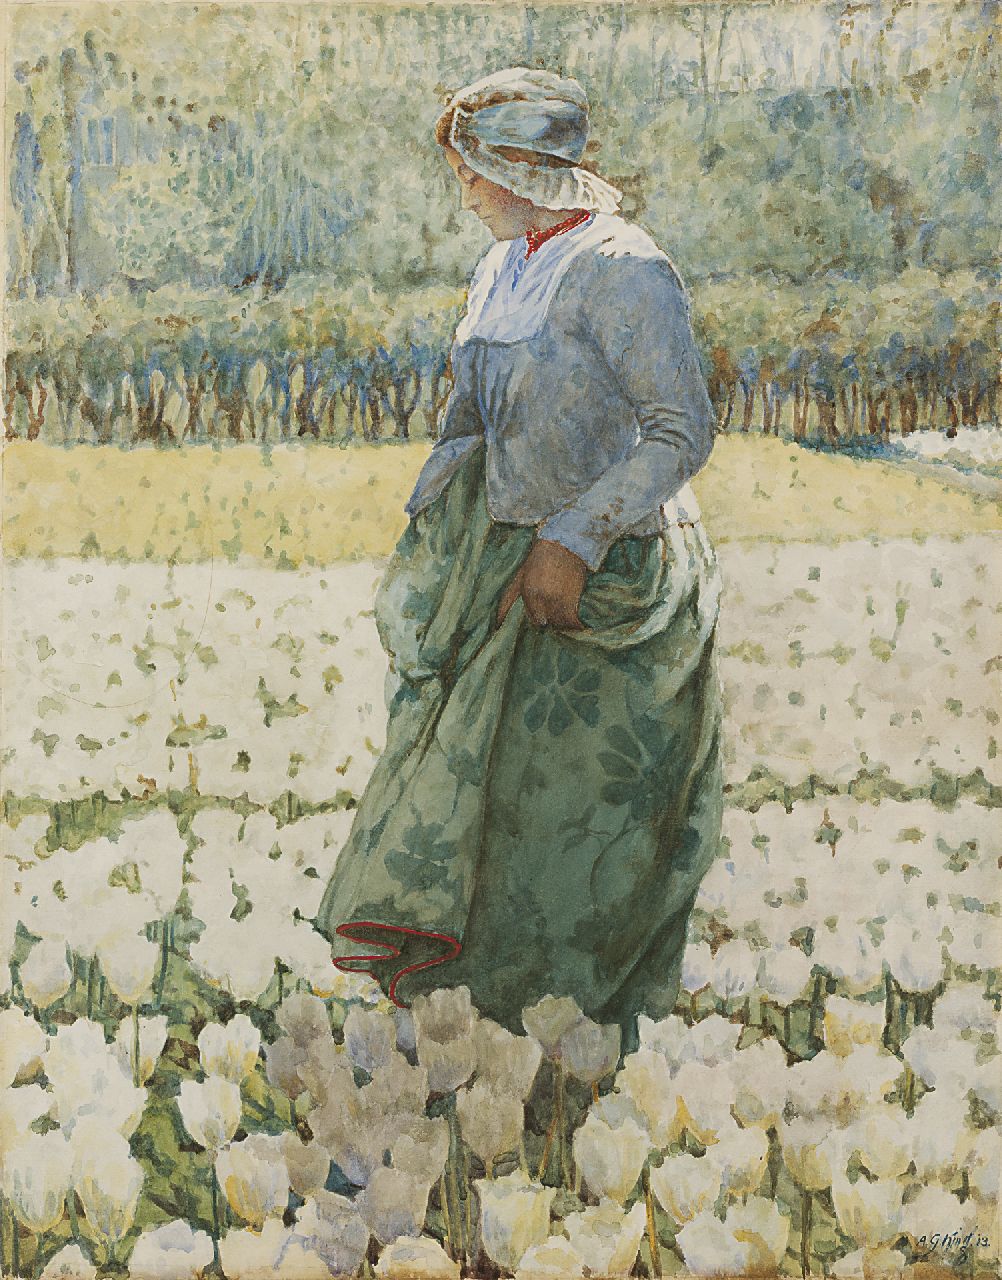 King A.G.  | Agnes Gardner King, Picking tulips, Aquarell auf Papier 47,4 x 37,3 cm, signed l.r. und dated '13